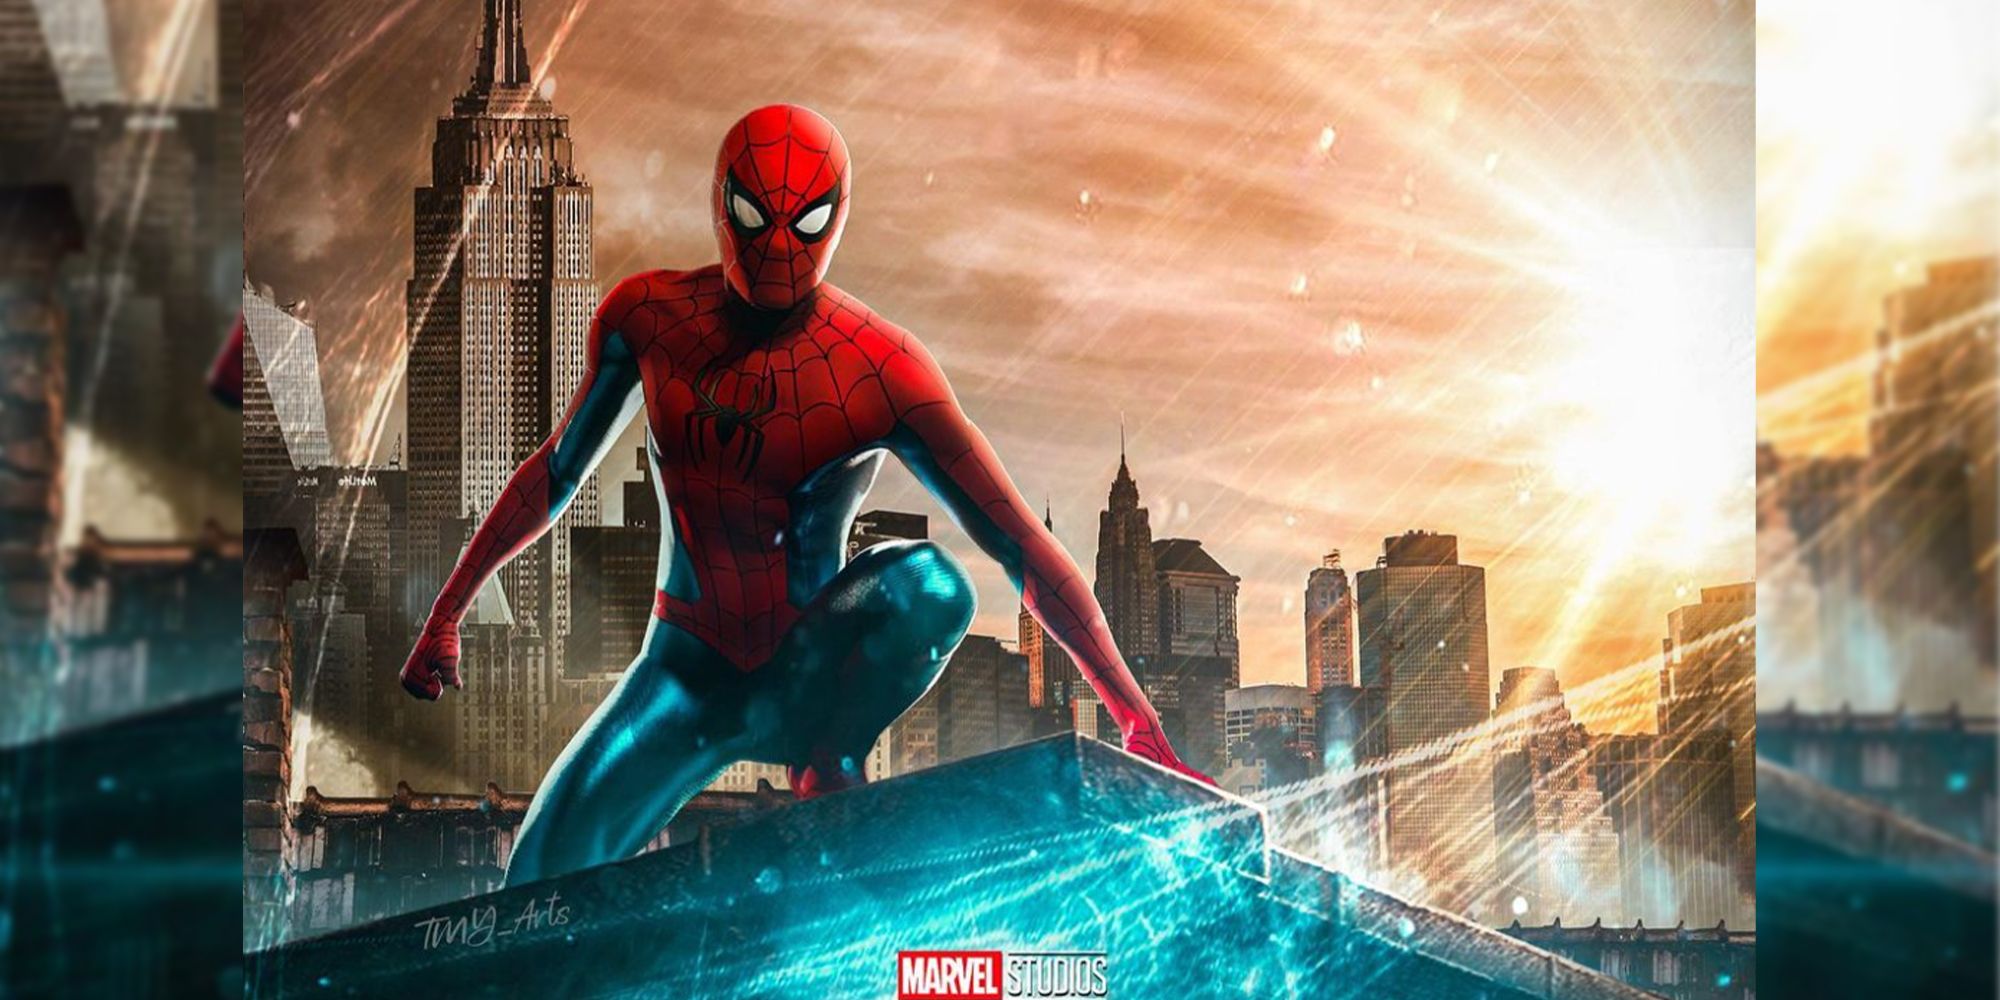 Spider-Man 4 Fan Poster Has Perfect Title For Tom Holland’s Next MCU Movie